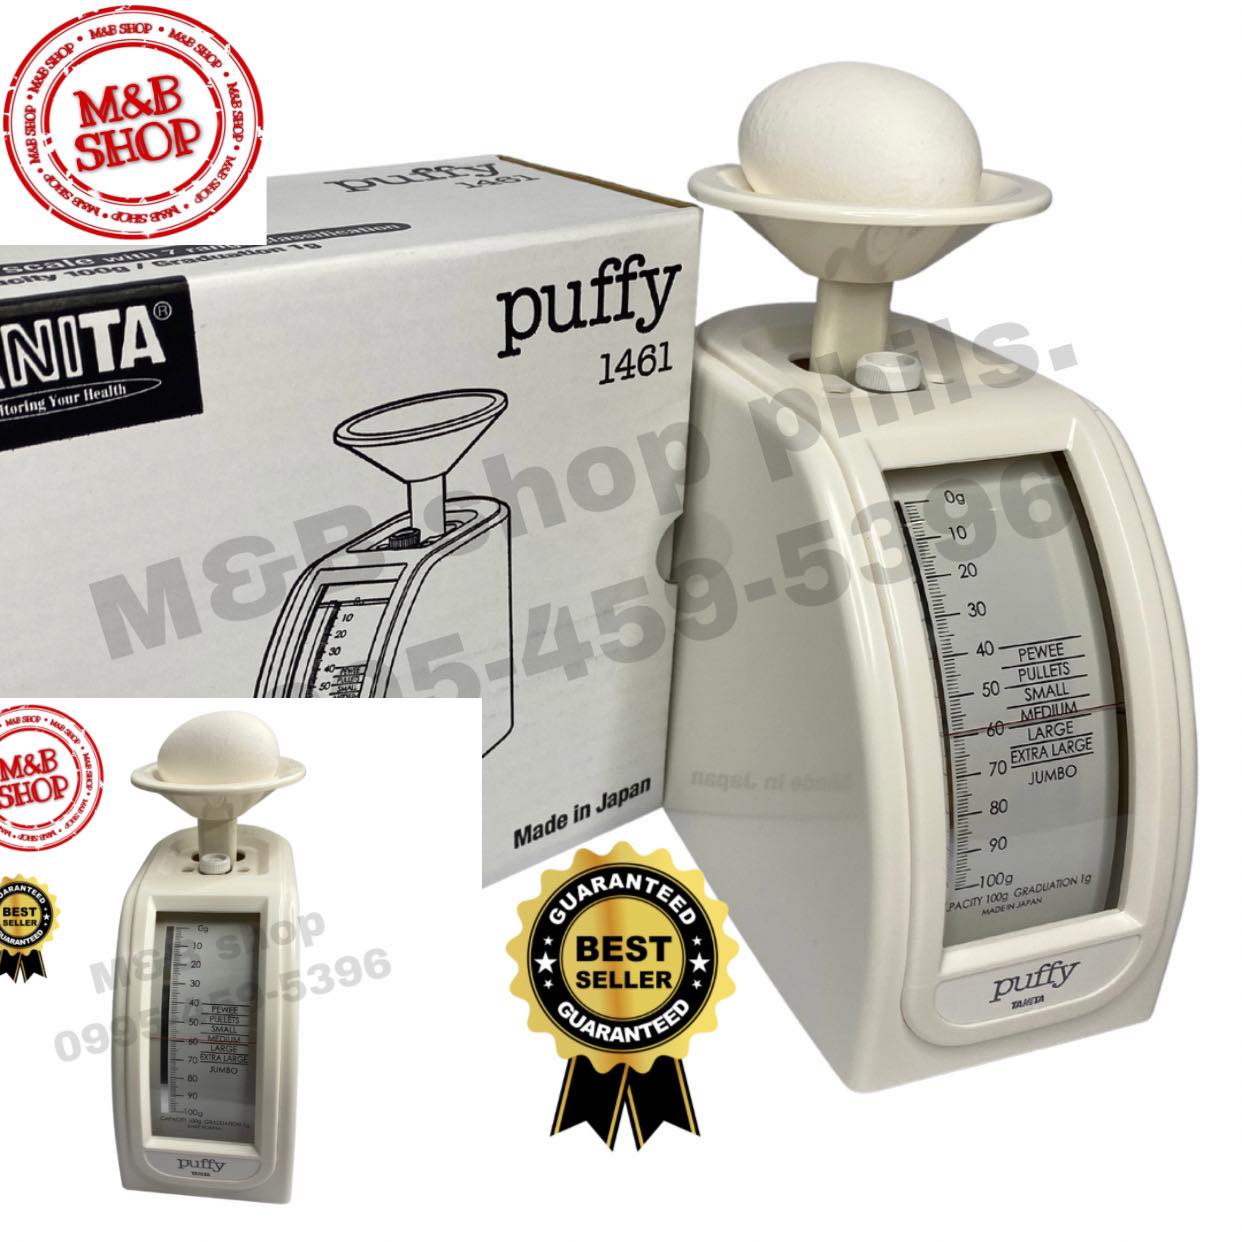 Tanita egg scale weighing scale for egg